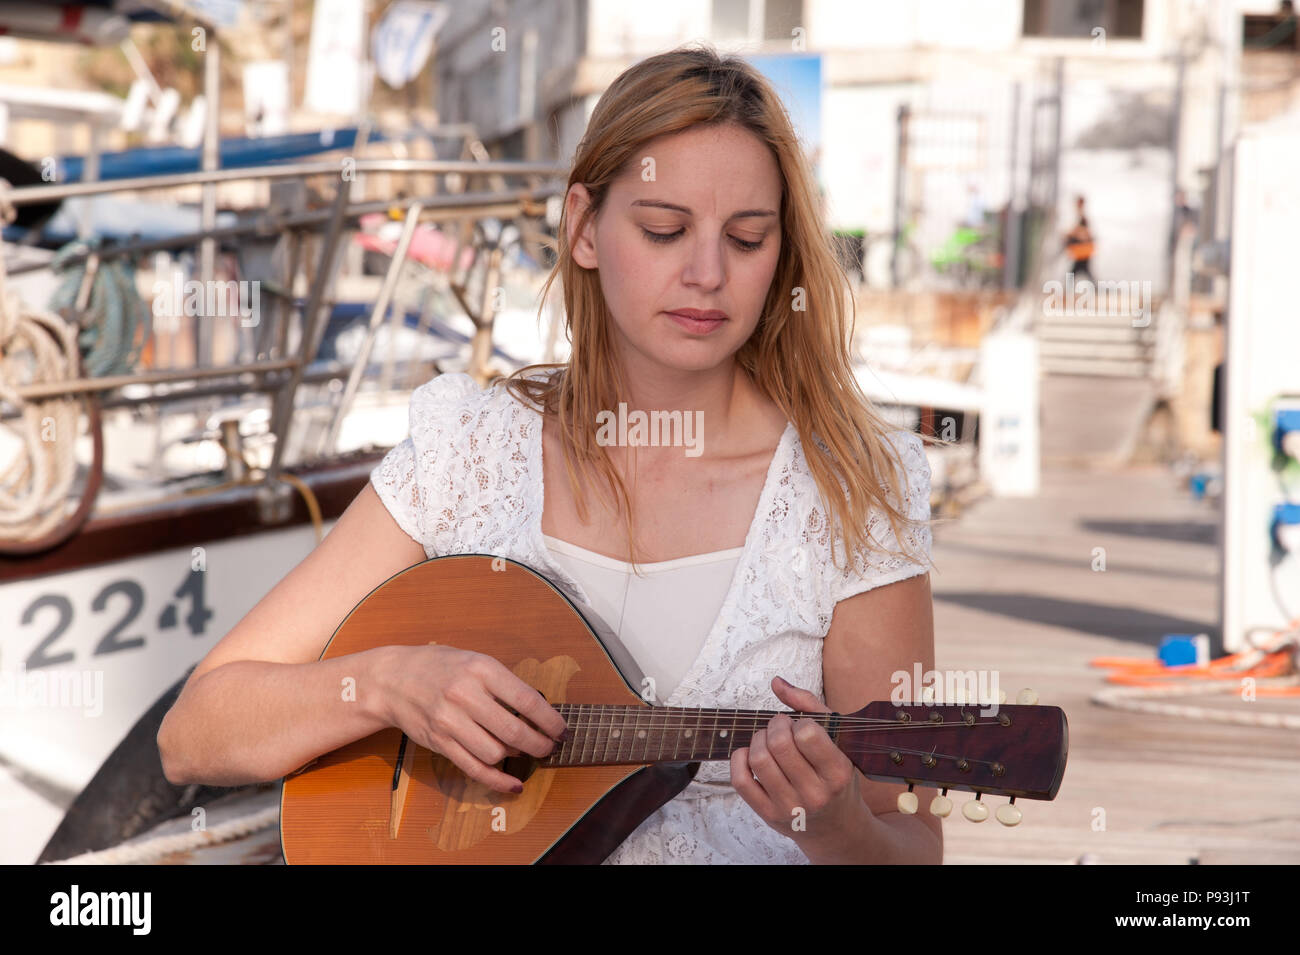 blonde lady play guitar Stock Photo